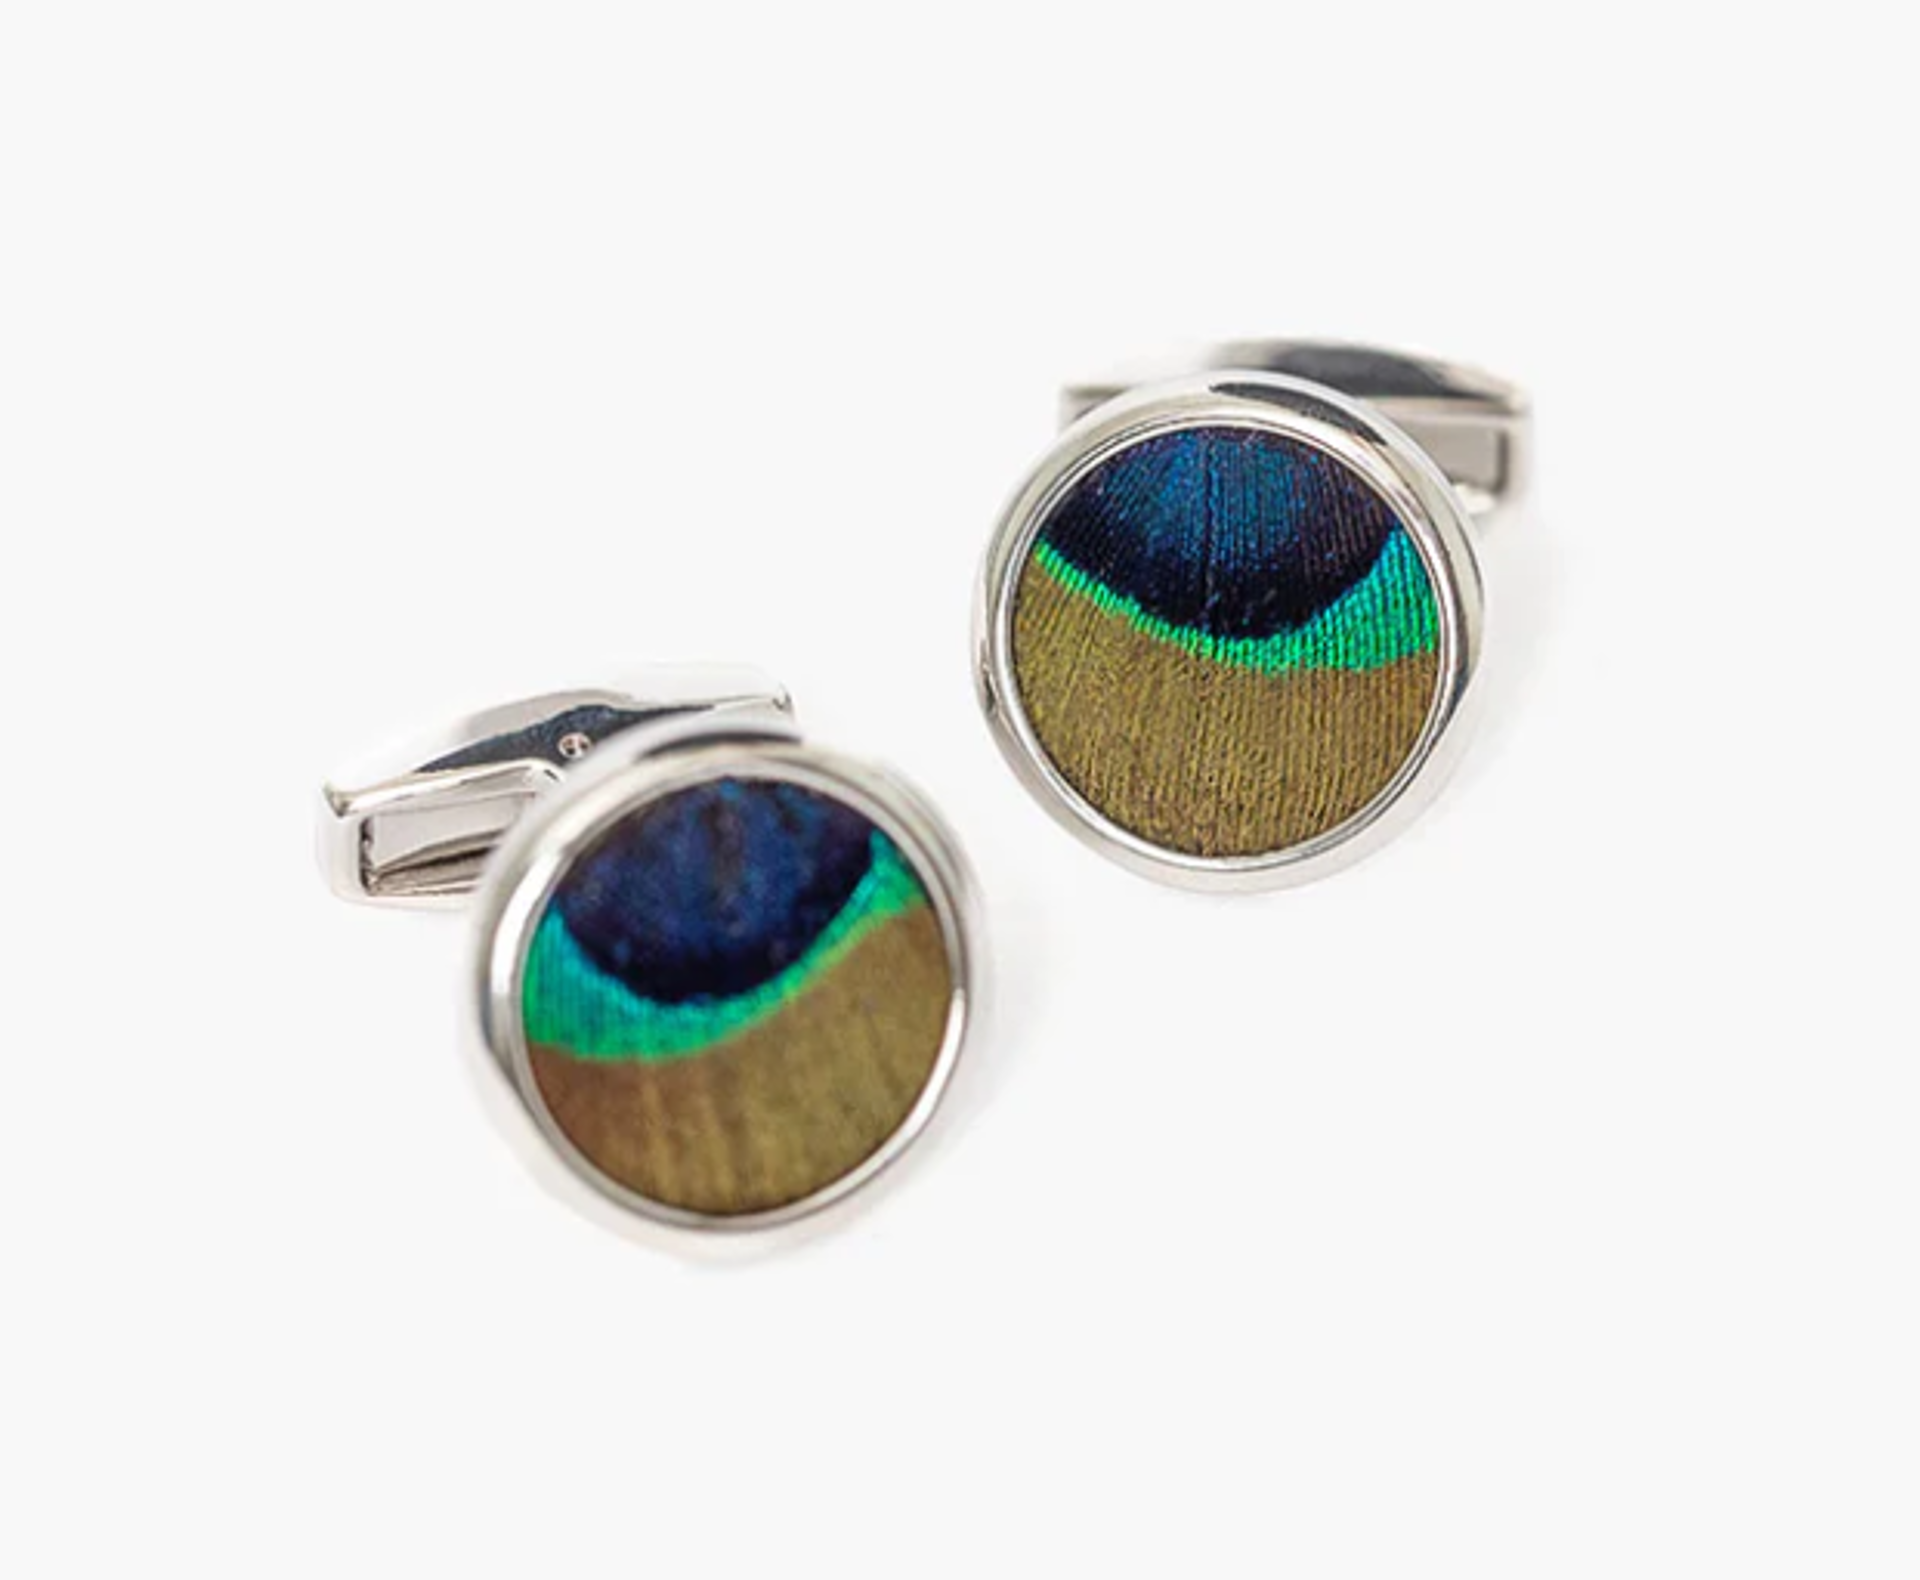 Capers Rhodium Cufflink, Peacock Feathers by Brackish